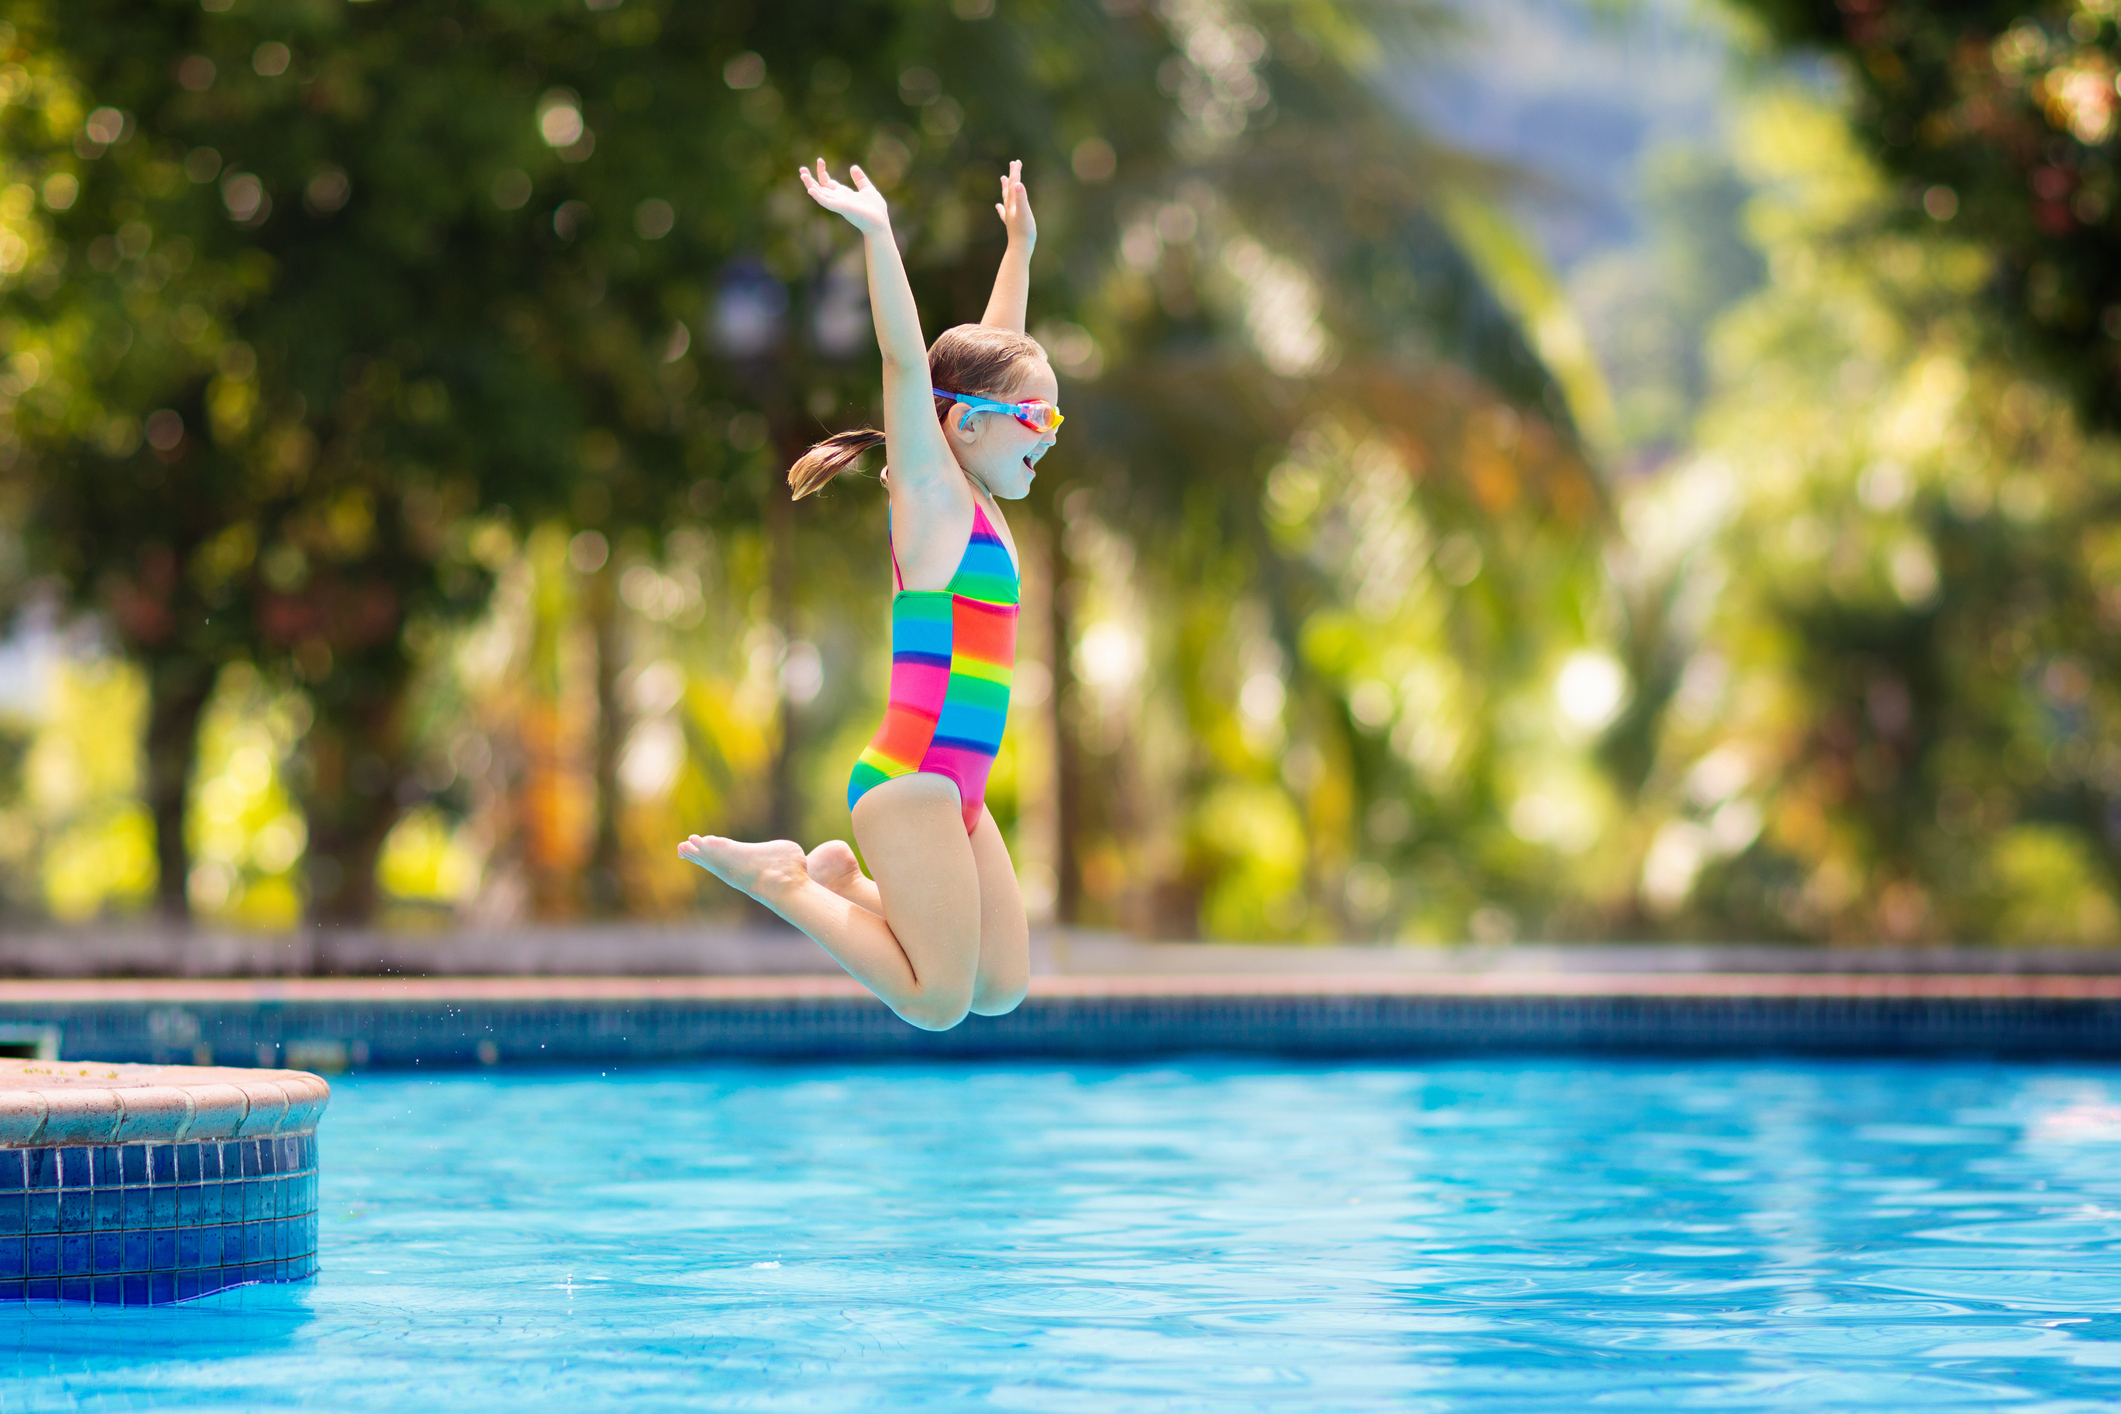 Never Buy Blue Swimsuits for Kids, a Swim Instructor Shares Why